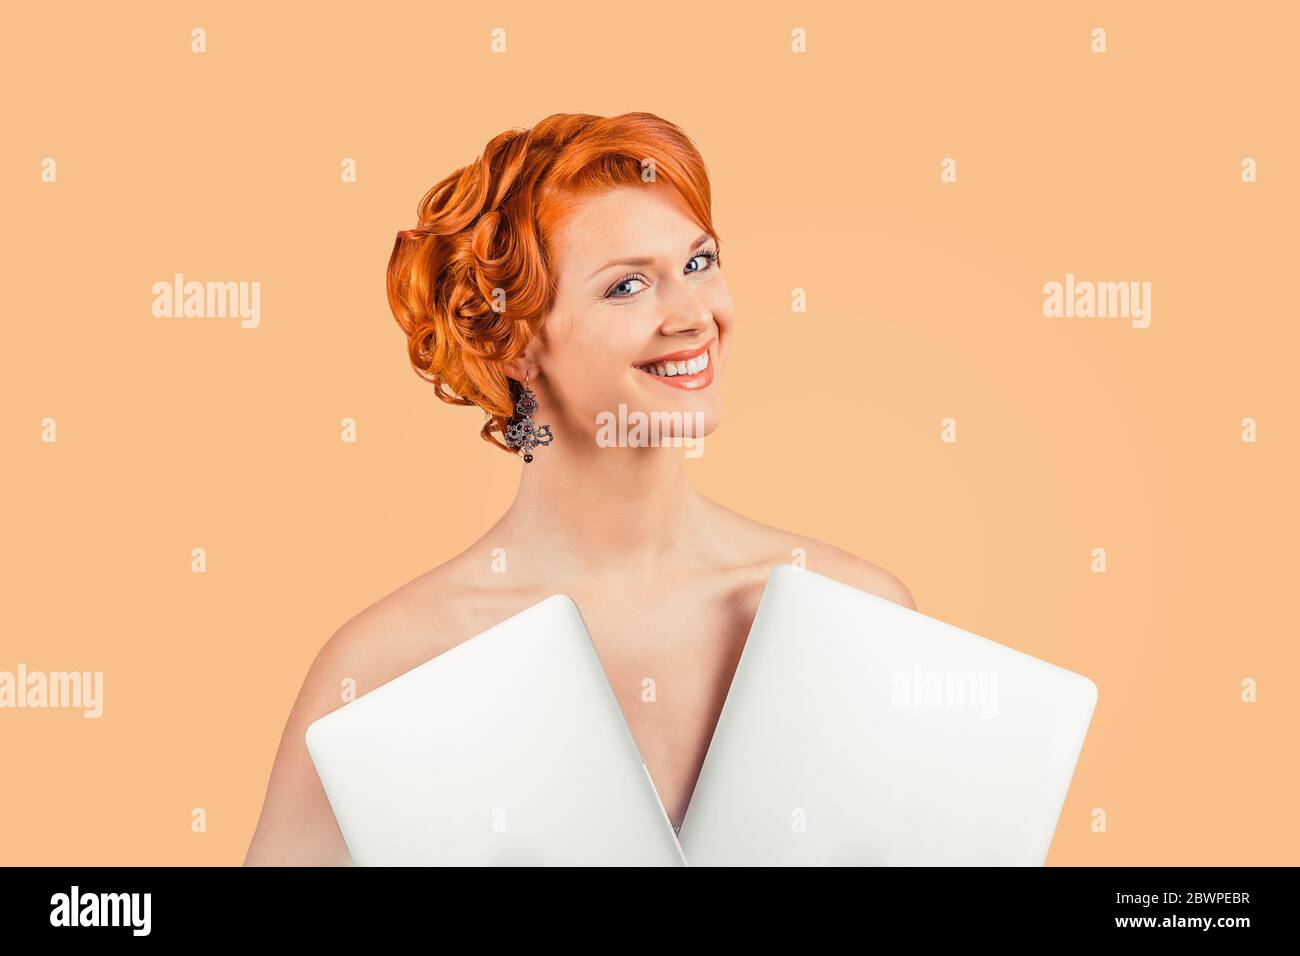 Girl with two laptops as a dress. Closeup red head beautiful young woman happy pinup girl in dress made of laptops computers, with curly updo retro vi Stock Photo